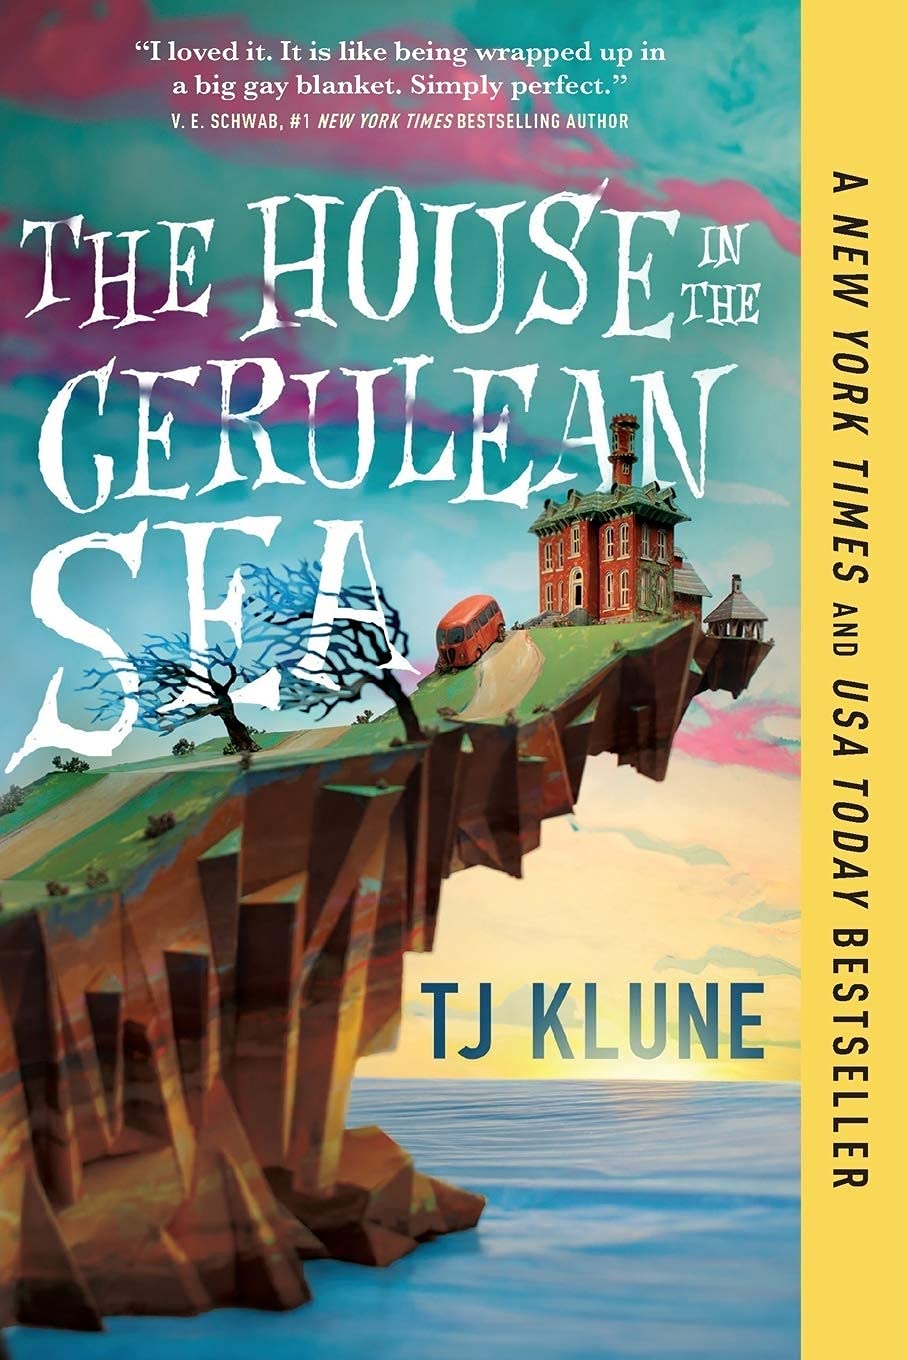 The House in the Cerulean Sea - Booksondemand